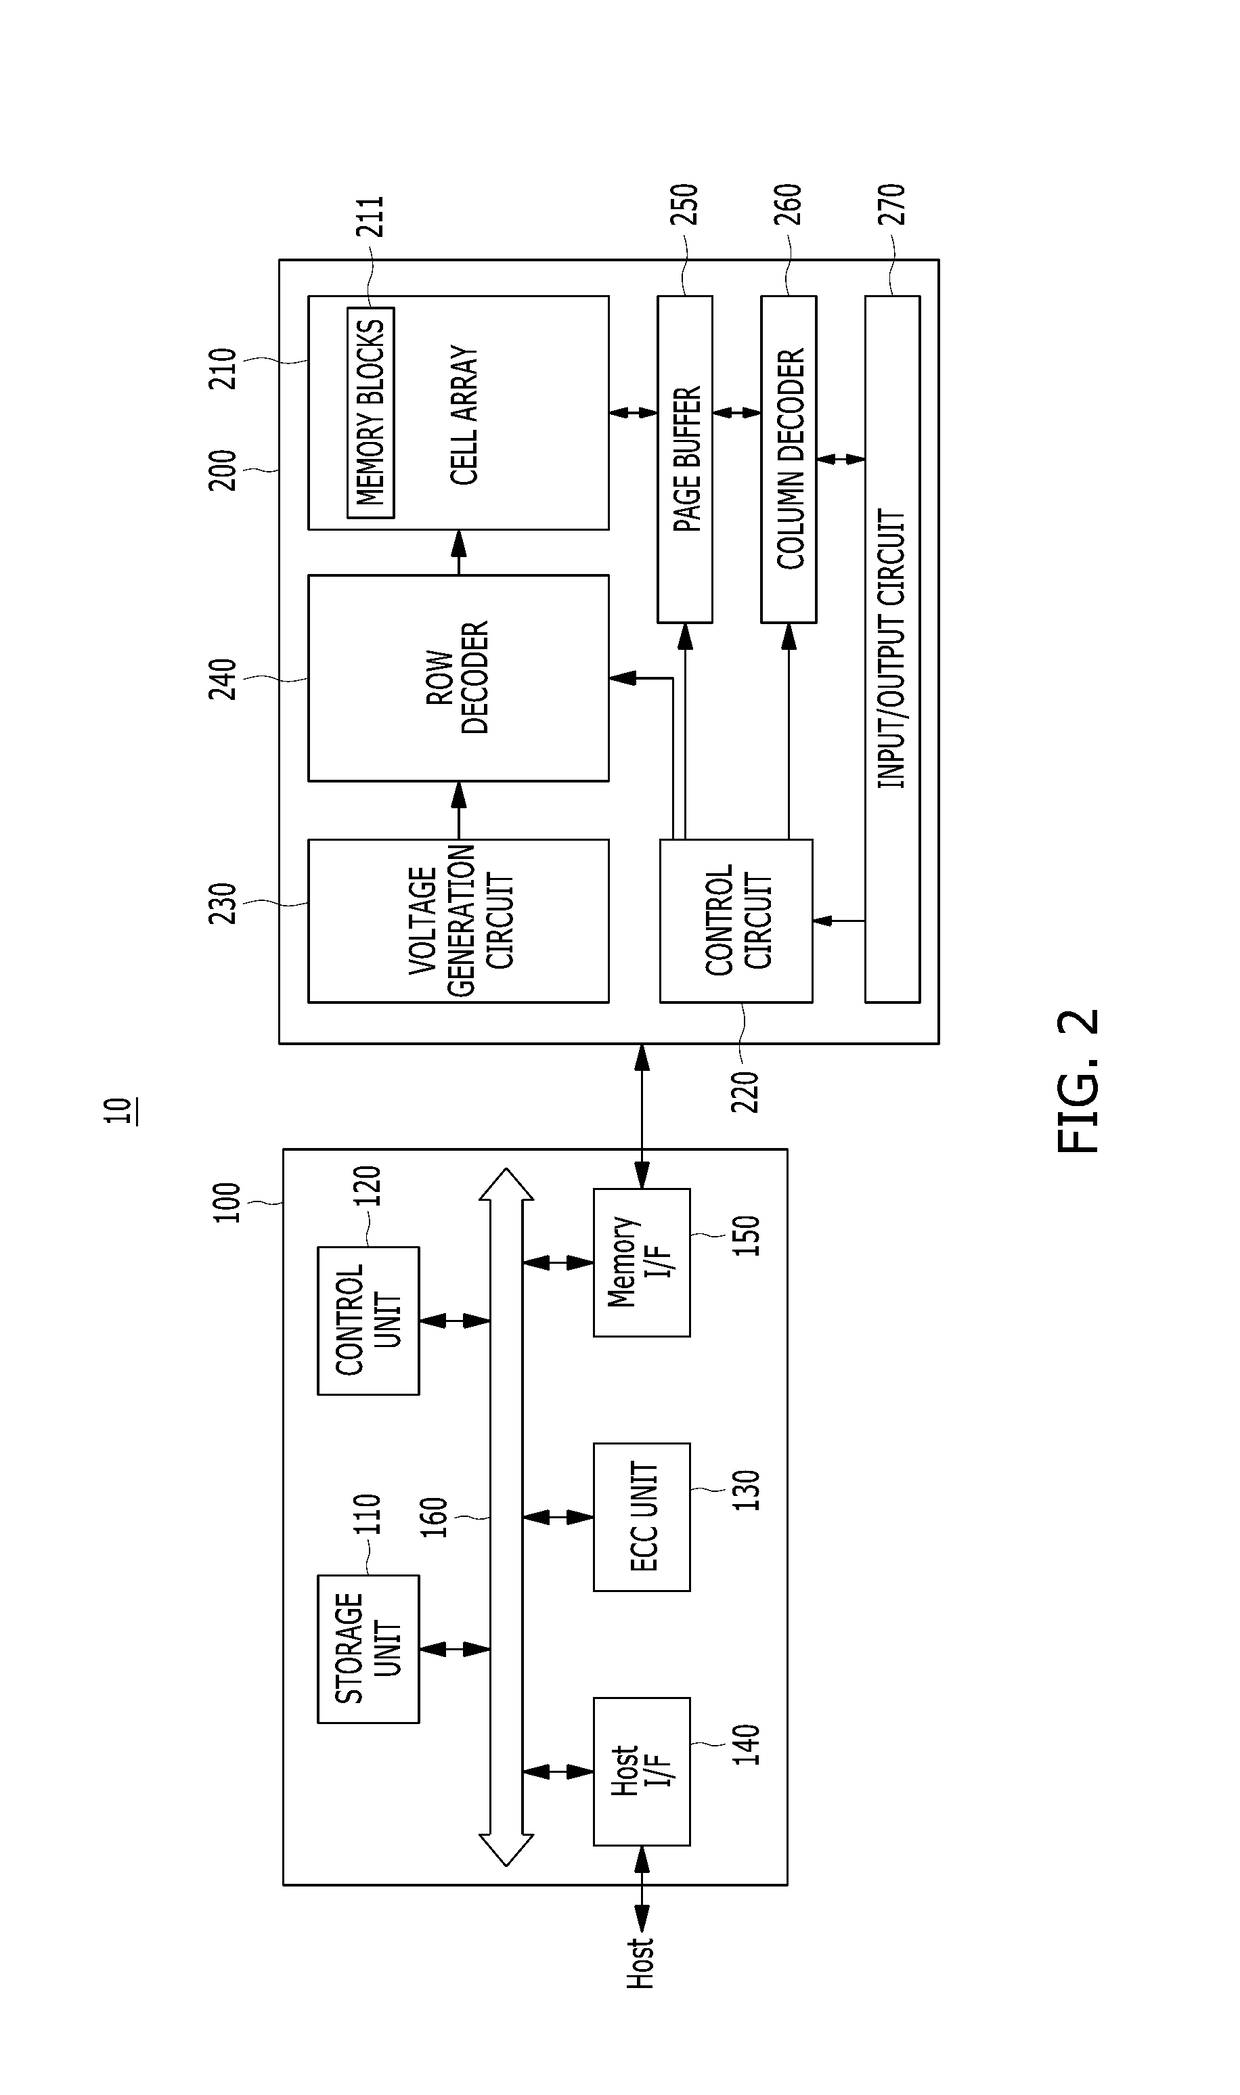 Memory system having feature boosting and operating method thereof